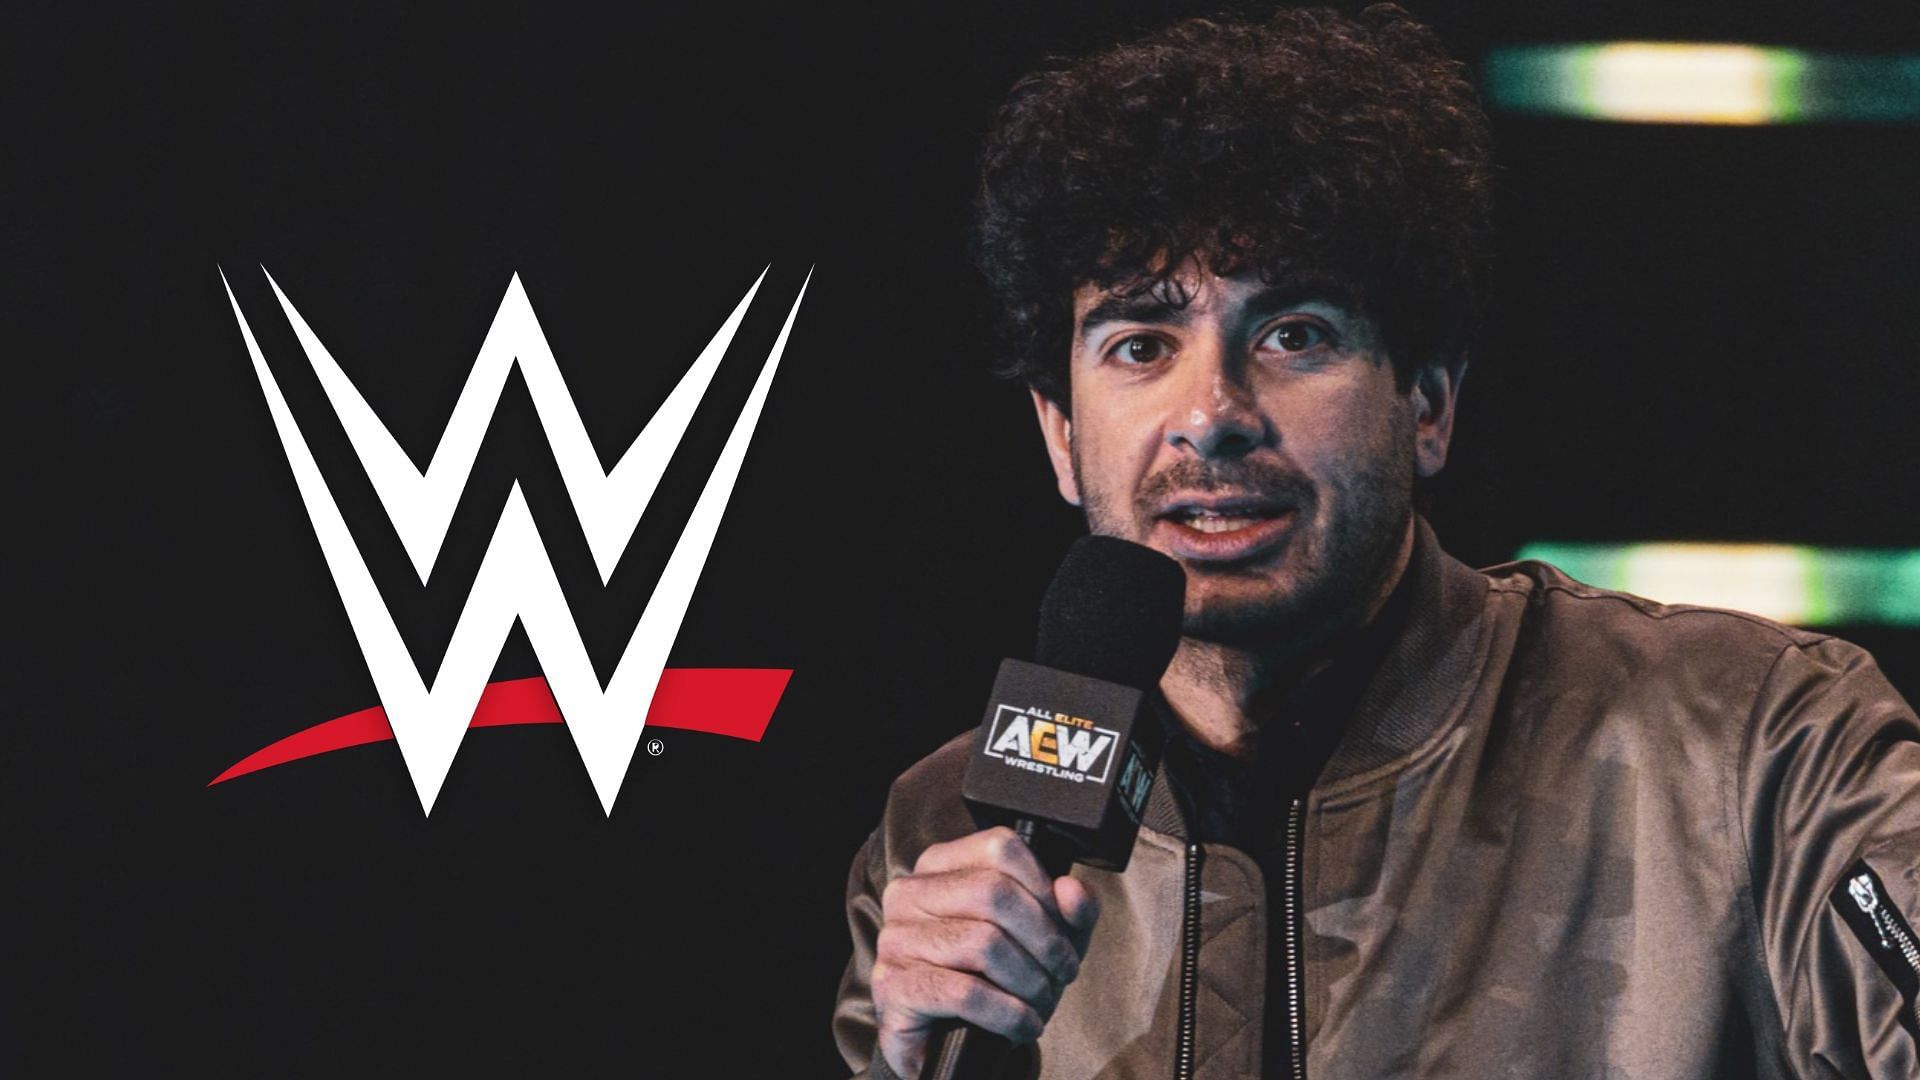 Could a major promotion outbid Tony Khan and AEW?